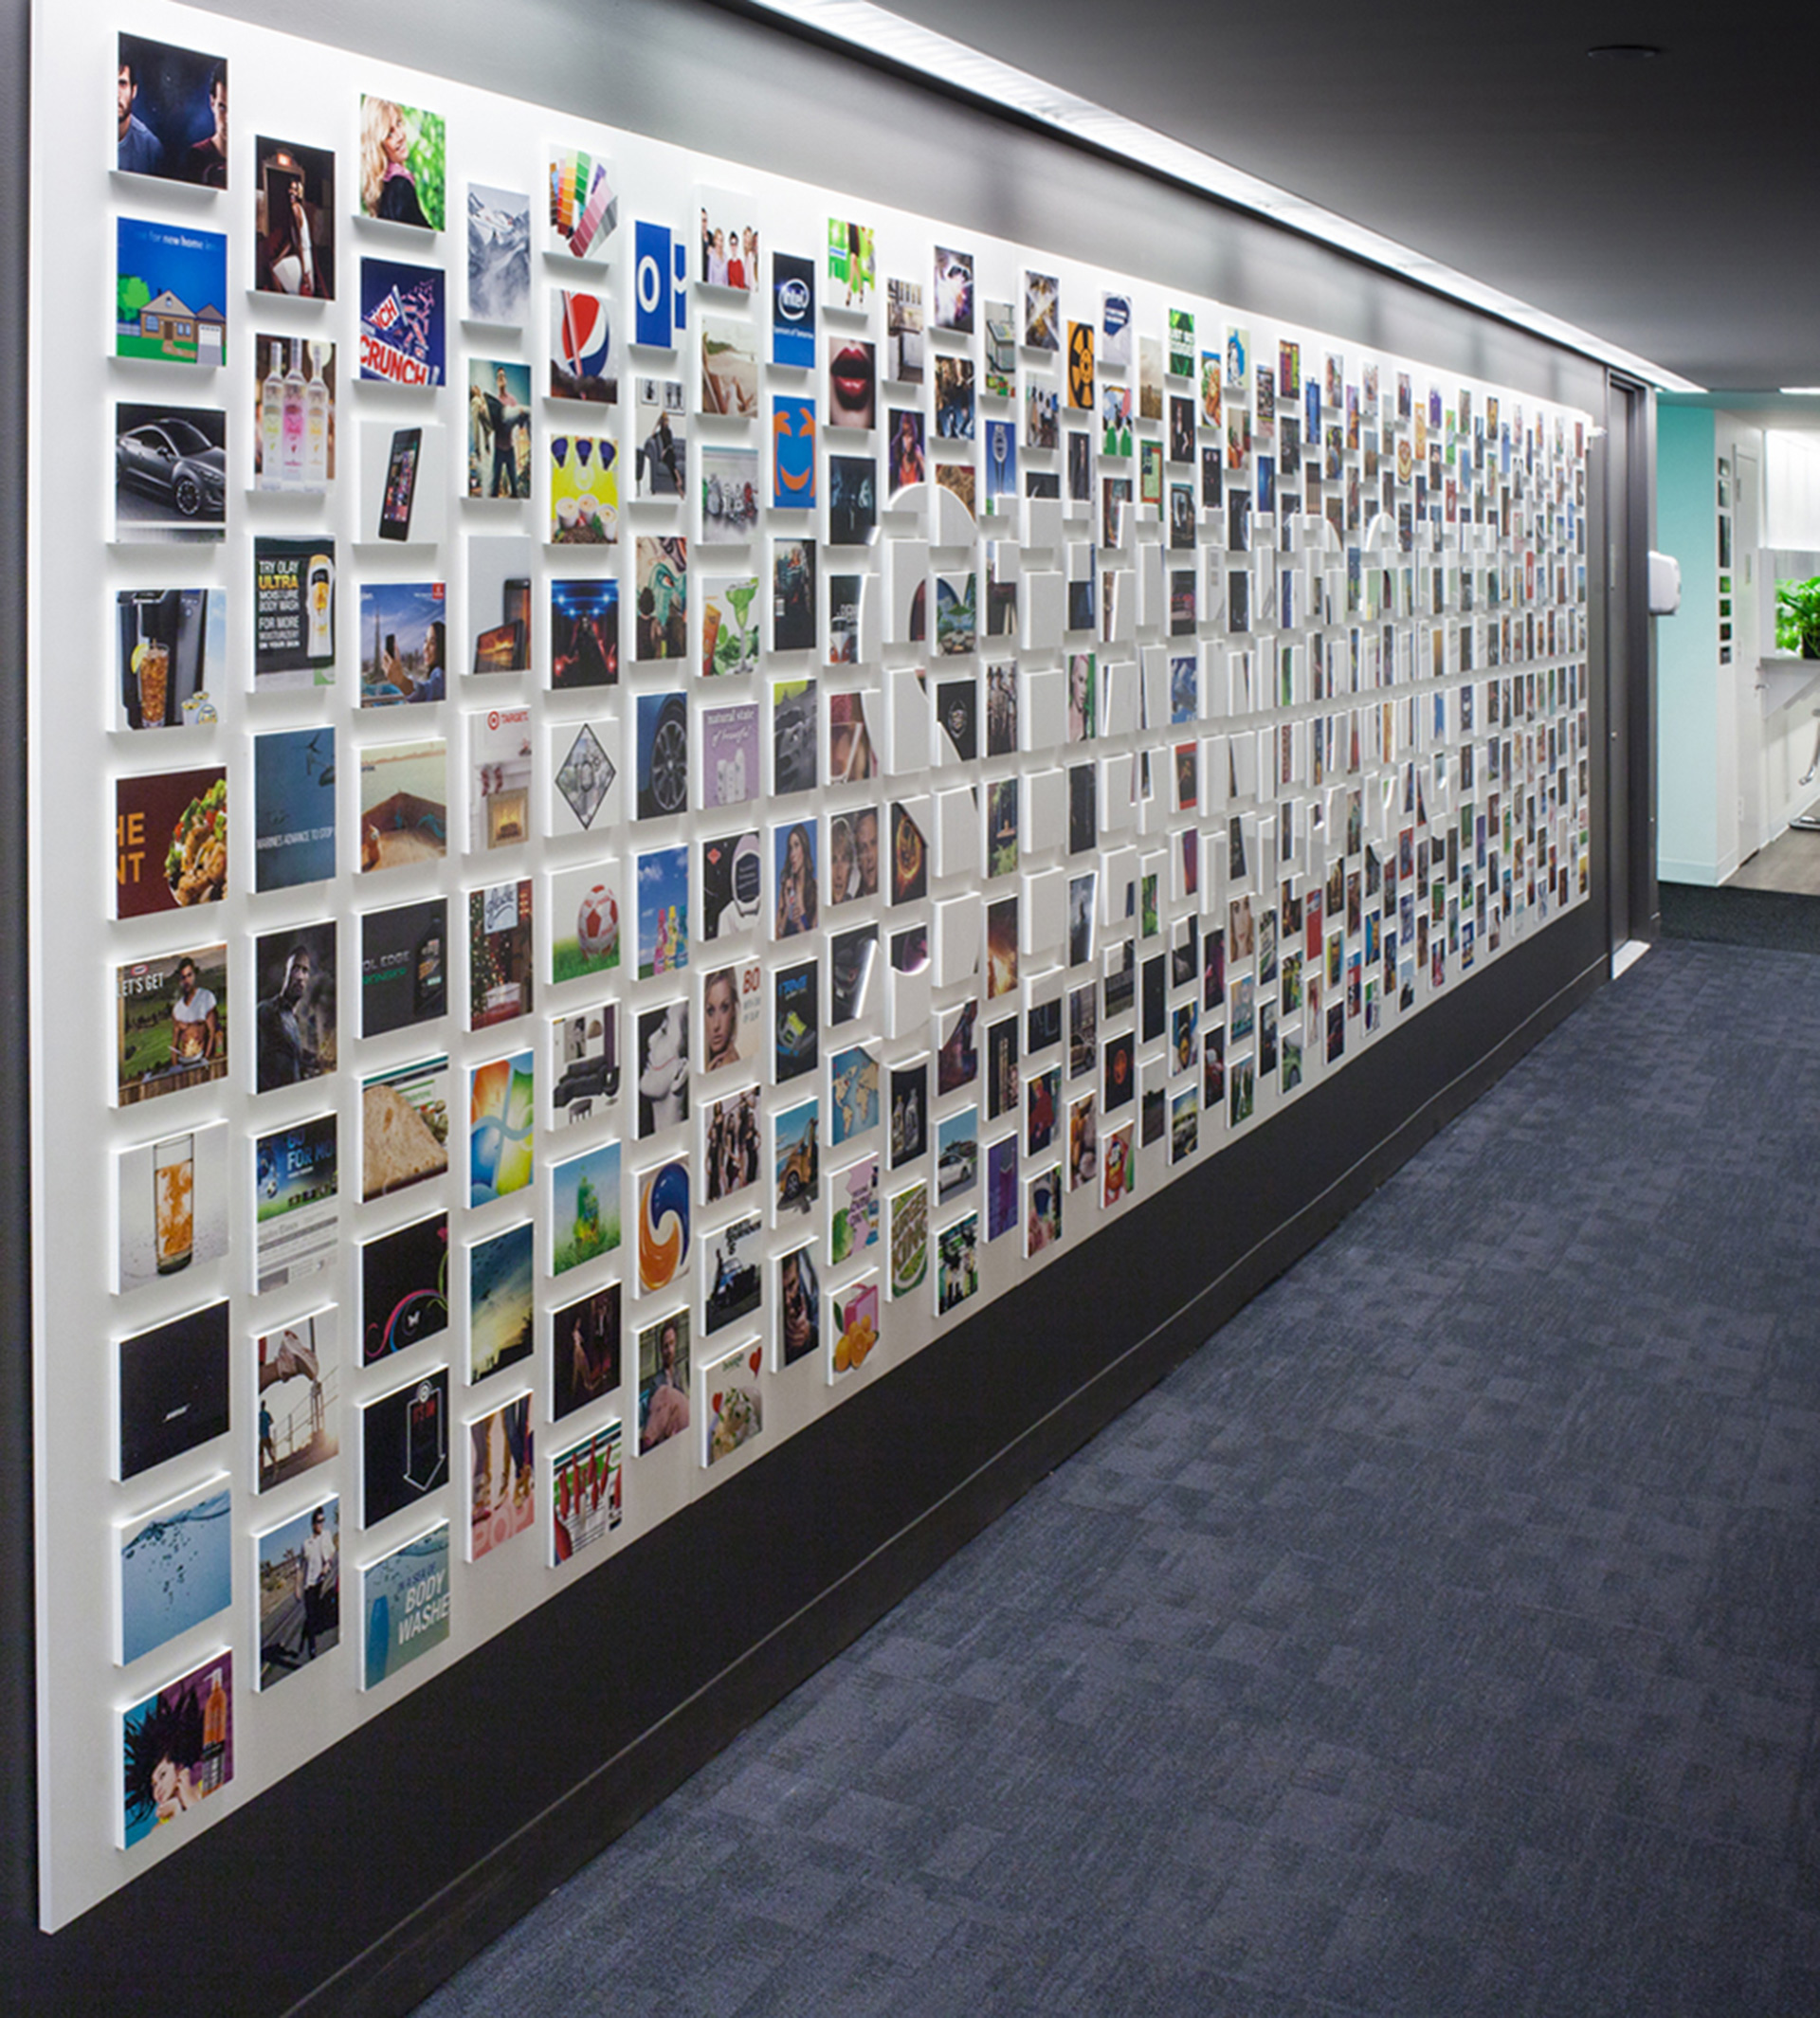 Environmental graphic wall treatment for Undertone Headquarters workspace.